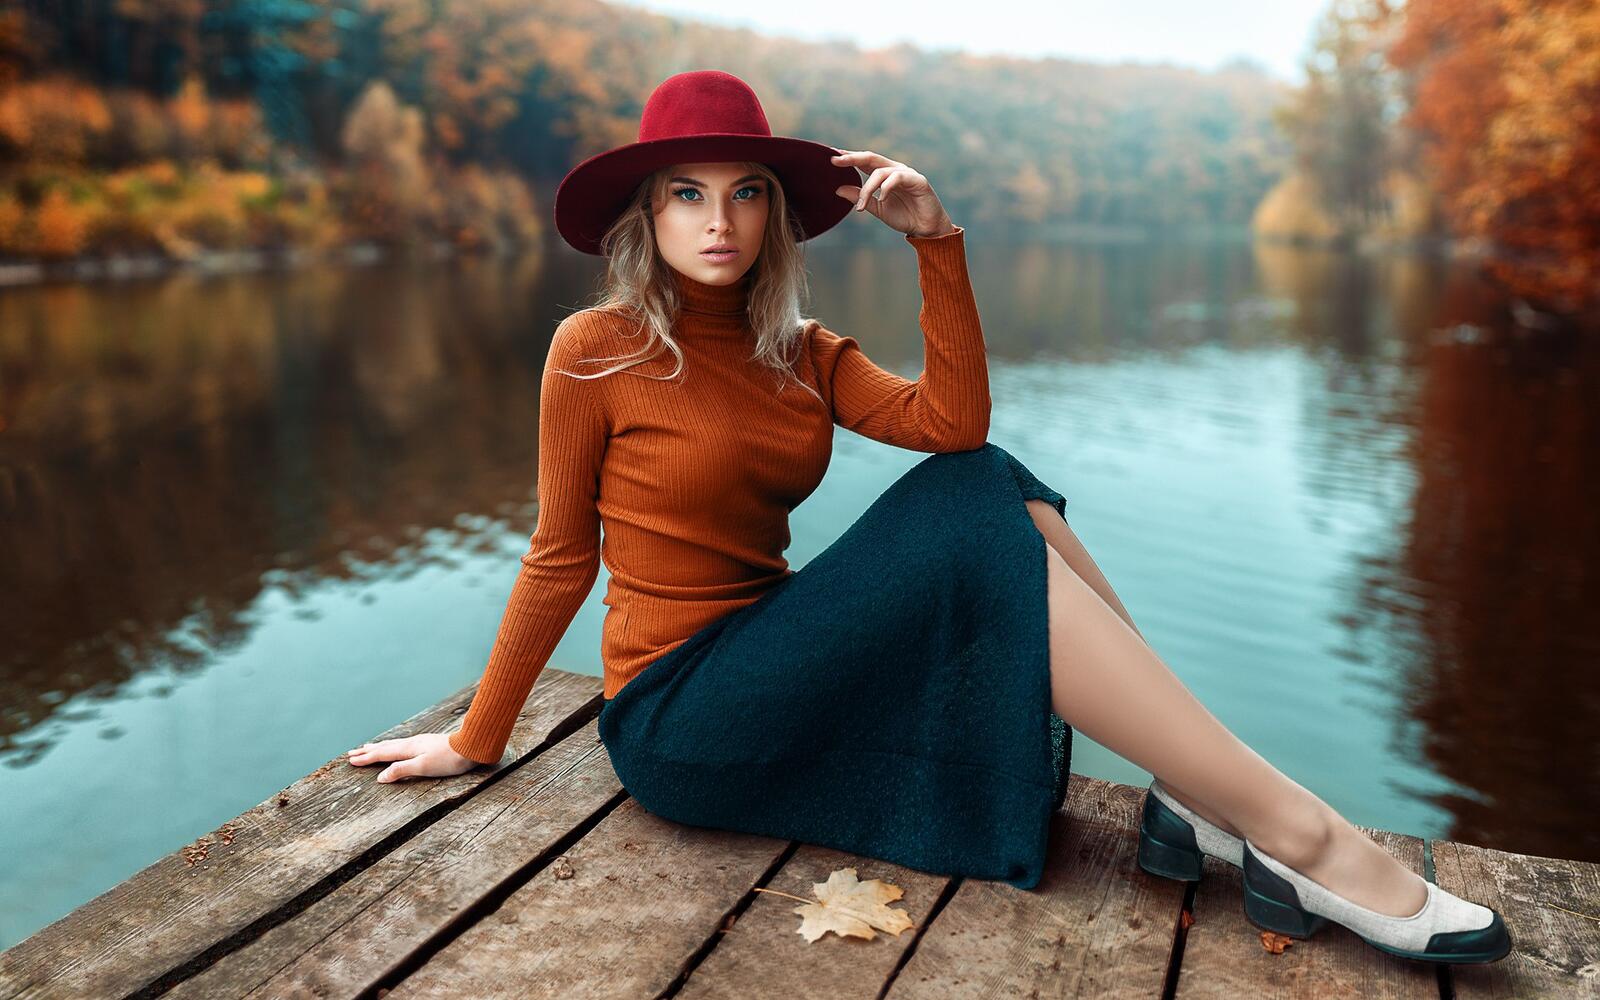 Free photo The girl with the hat on the wooden bridge